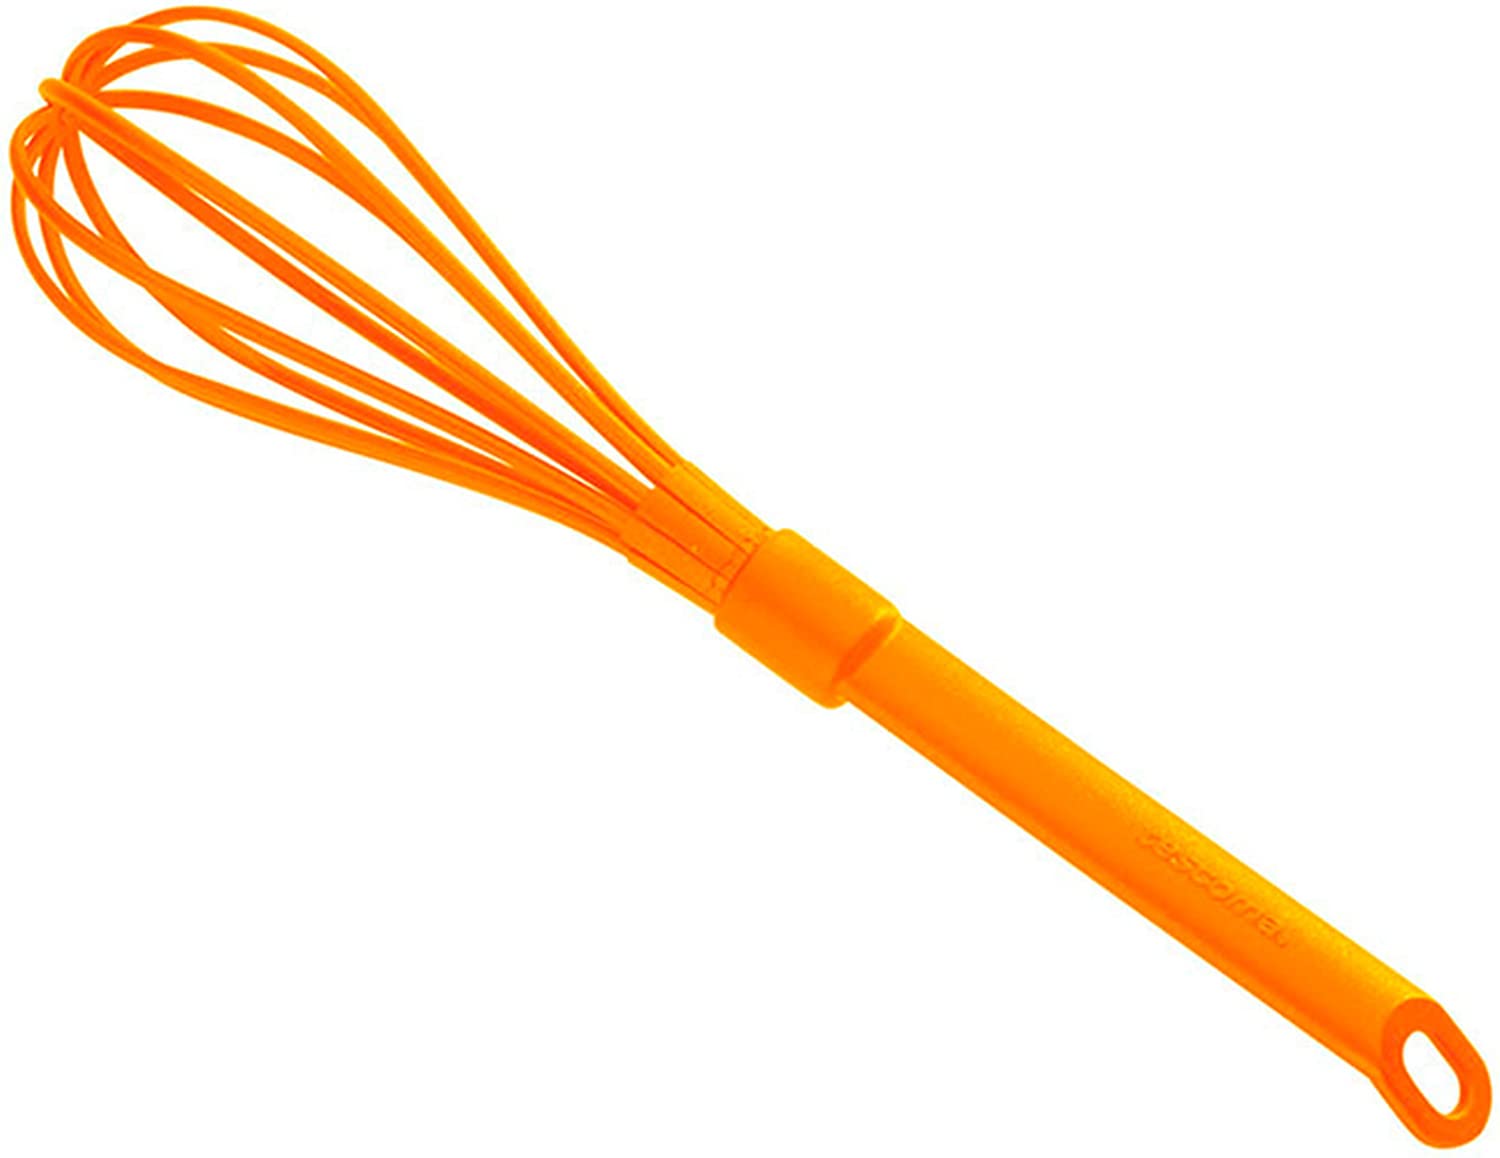 Tescoma Space Tone Egg whisk 638059 Assorted Colours